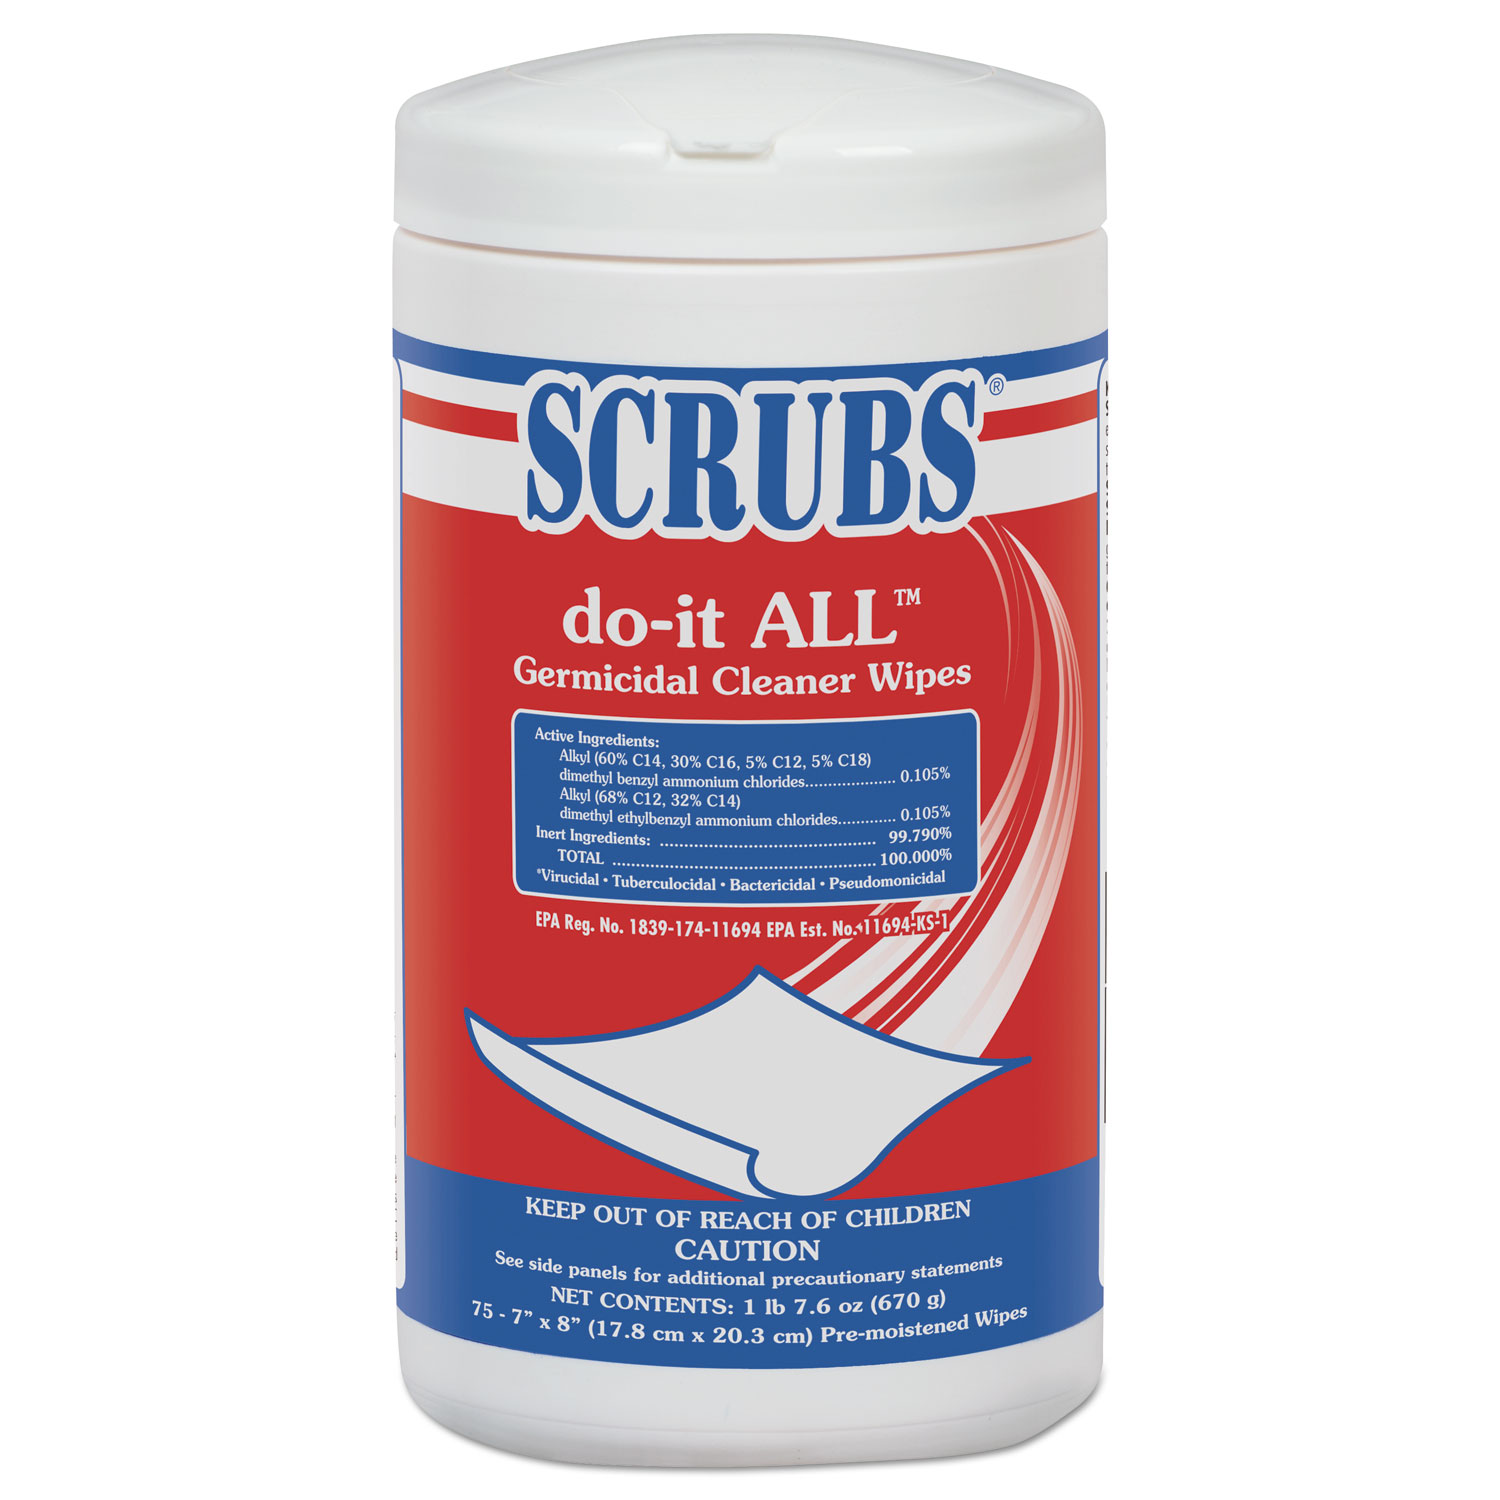  SCRUBS 98075 do-it ALL Germicidal Cleaner Wipes, Lemon, 7 x 8, White, 75/Container (ITW98075EA) 